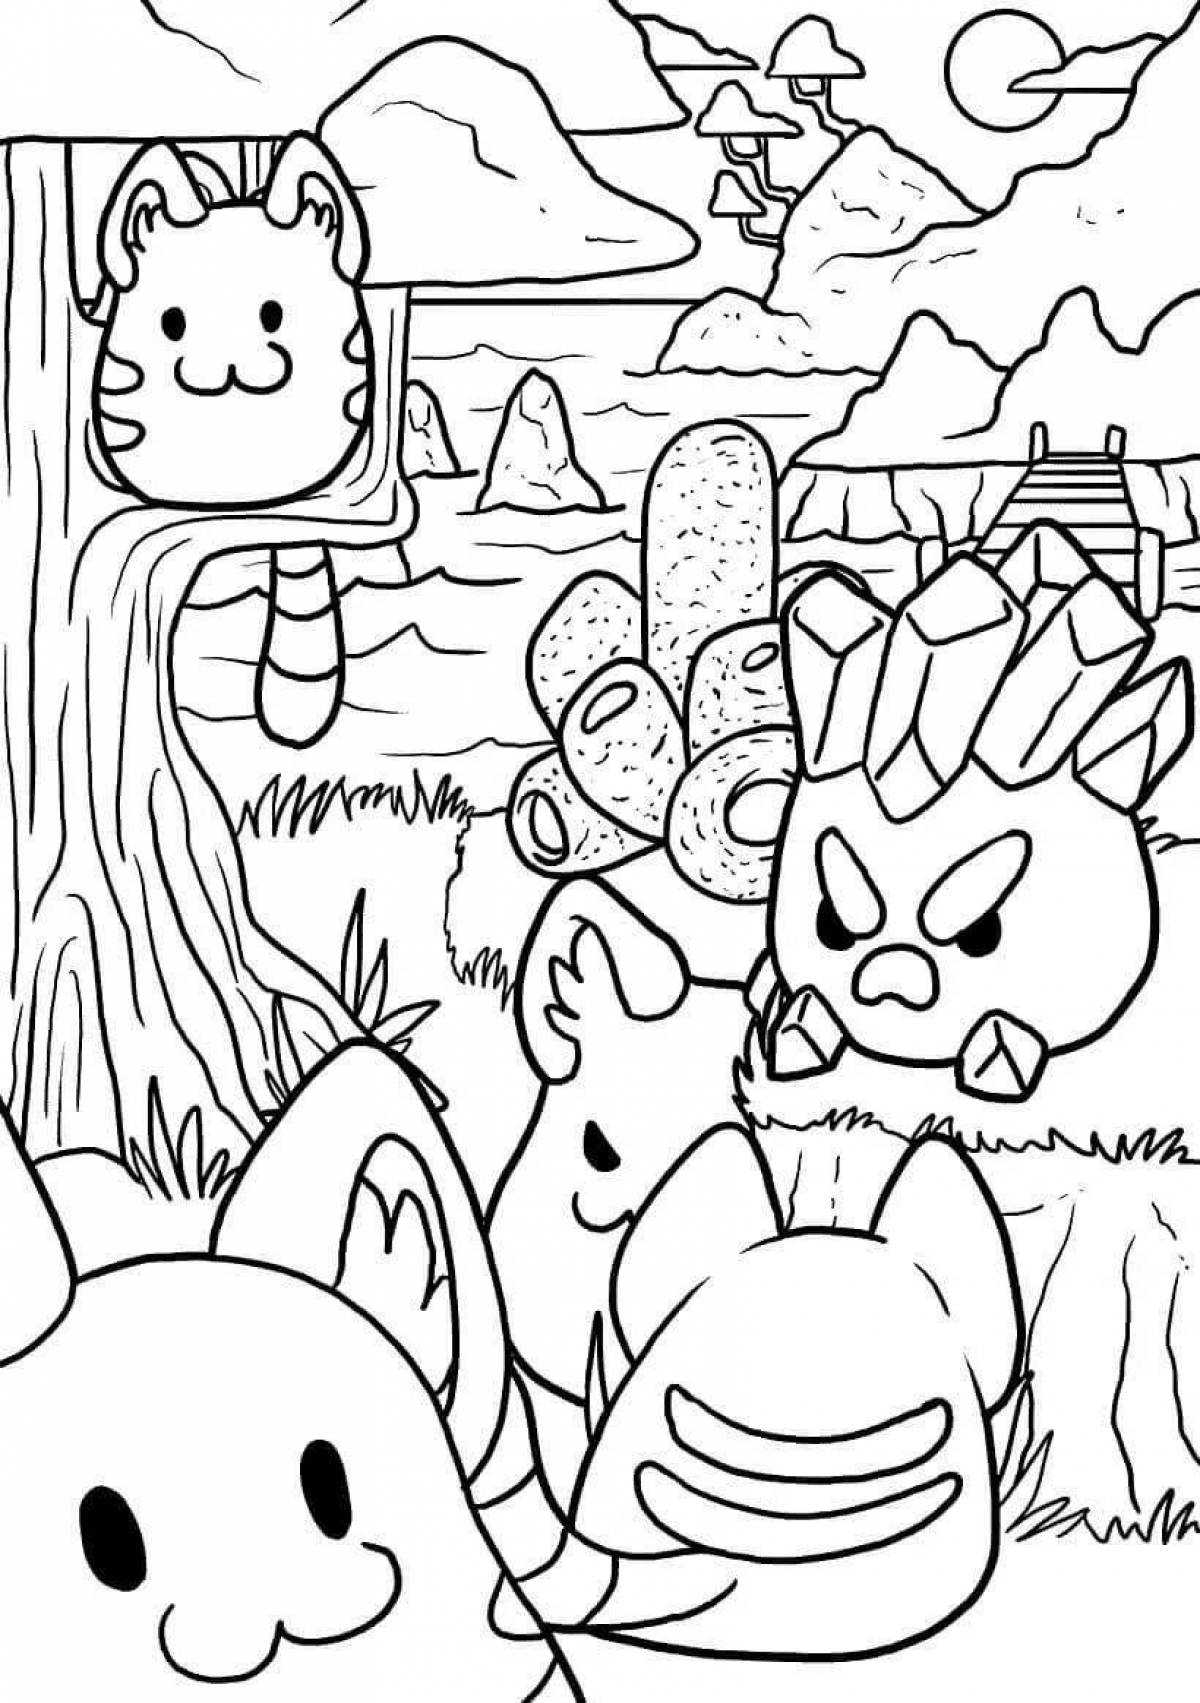 Colorful slime coloring page for kids